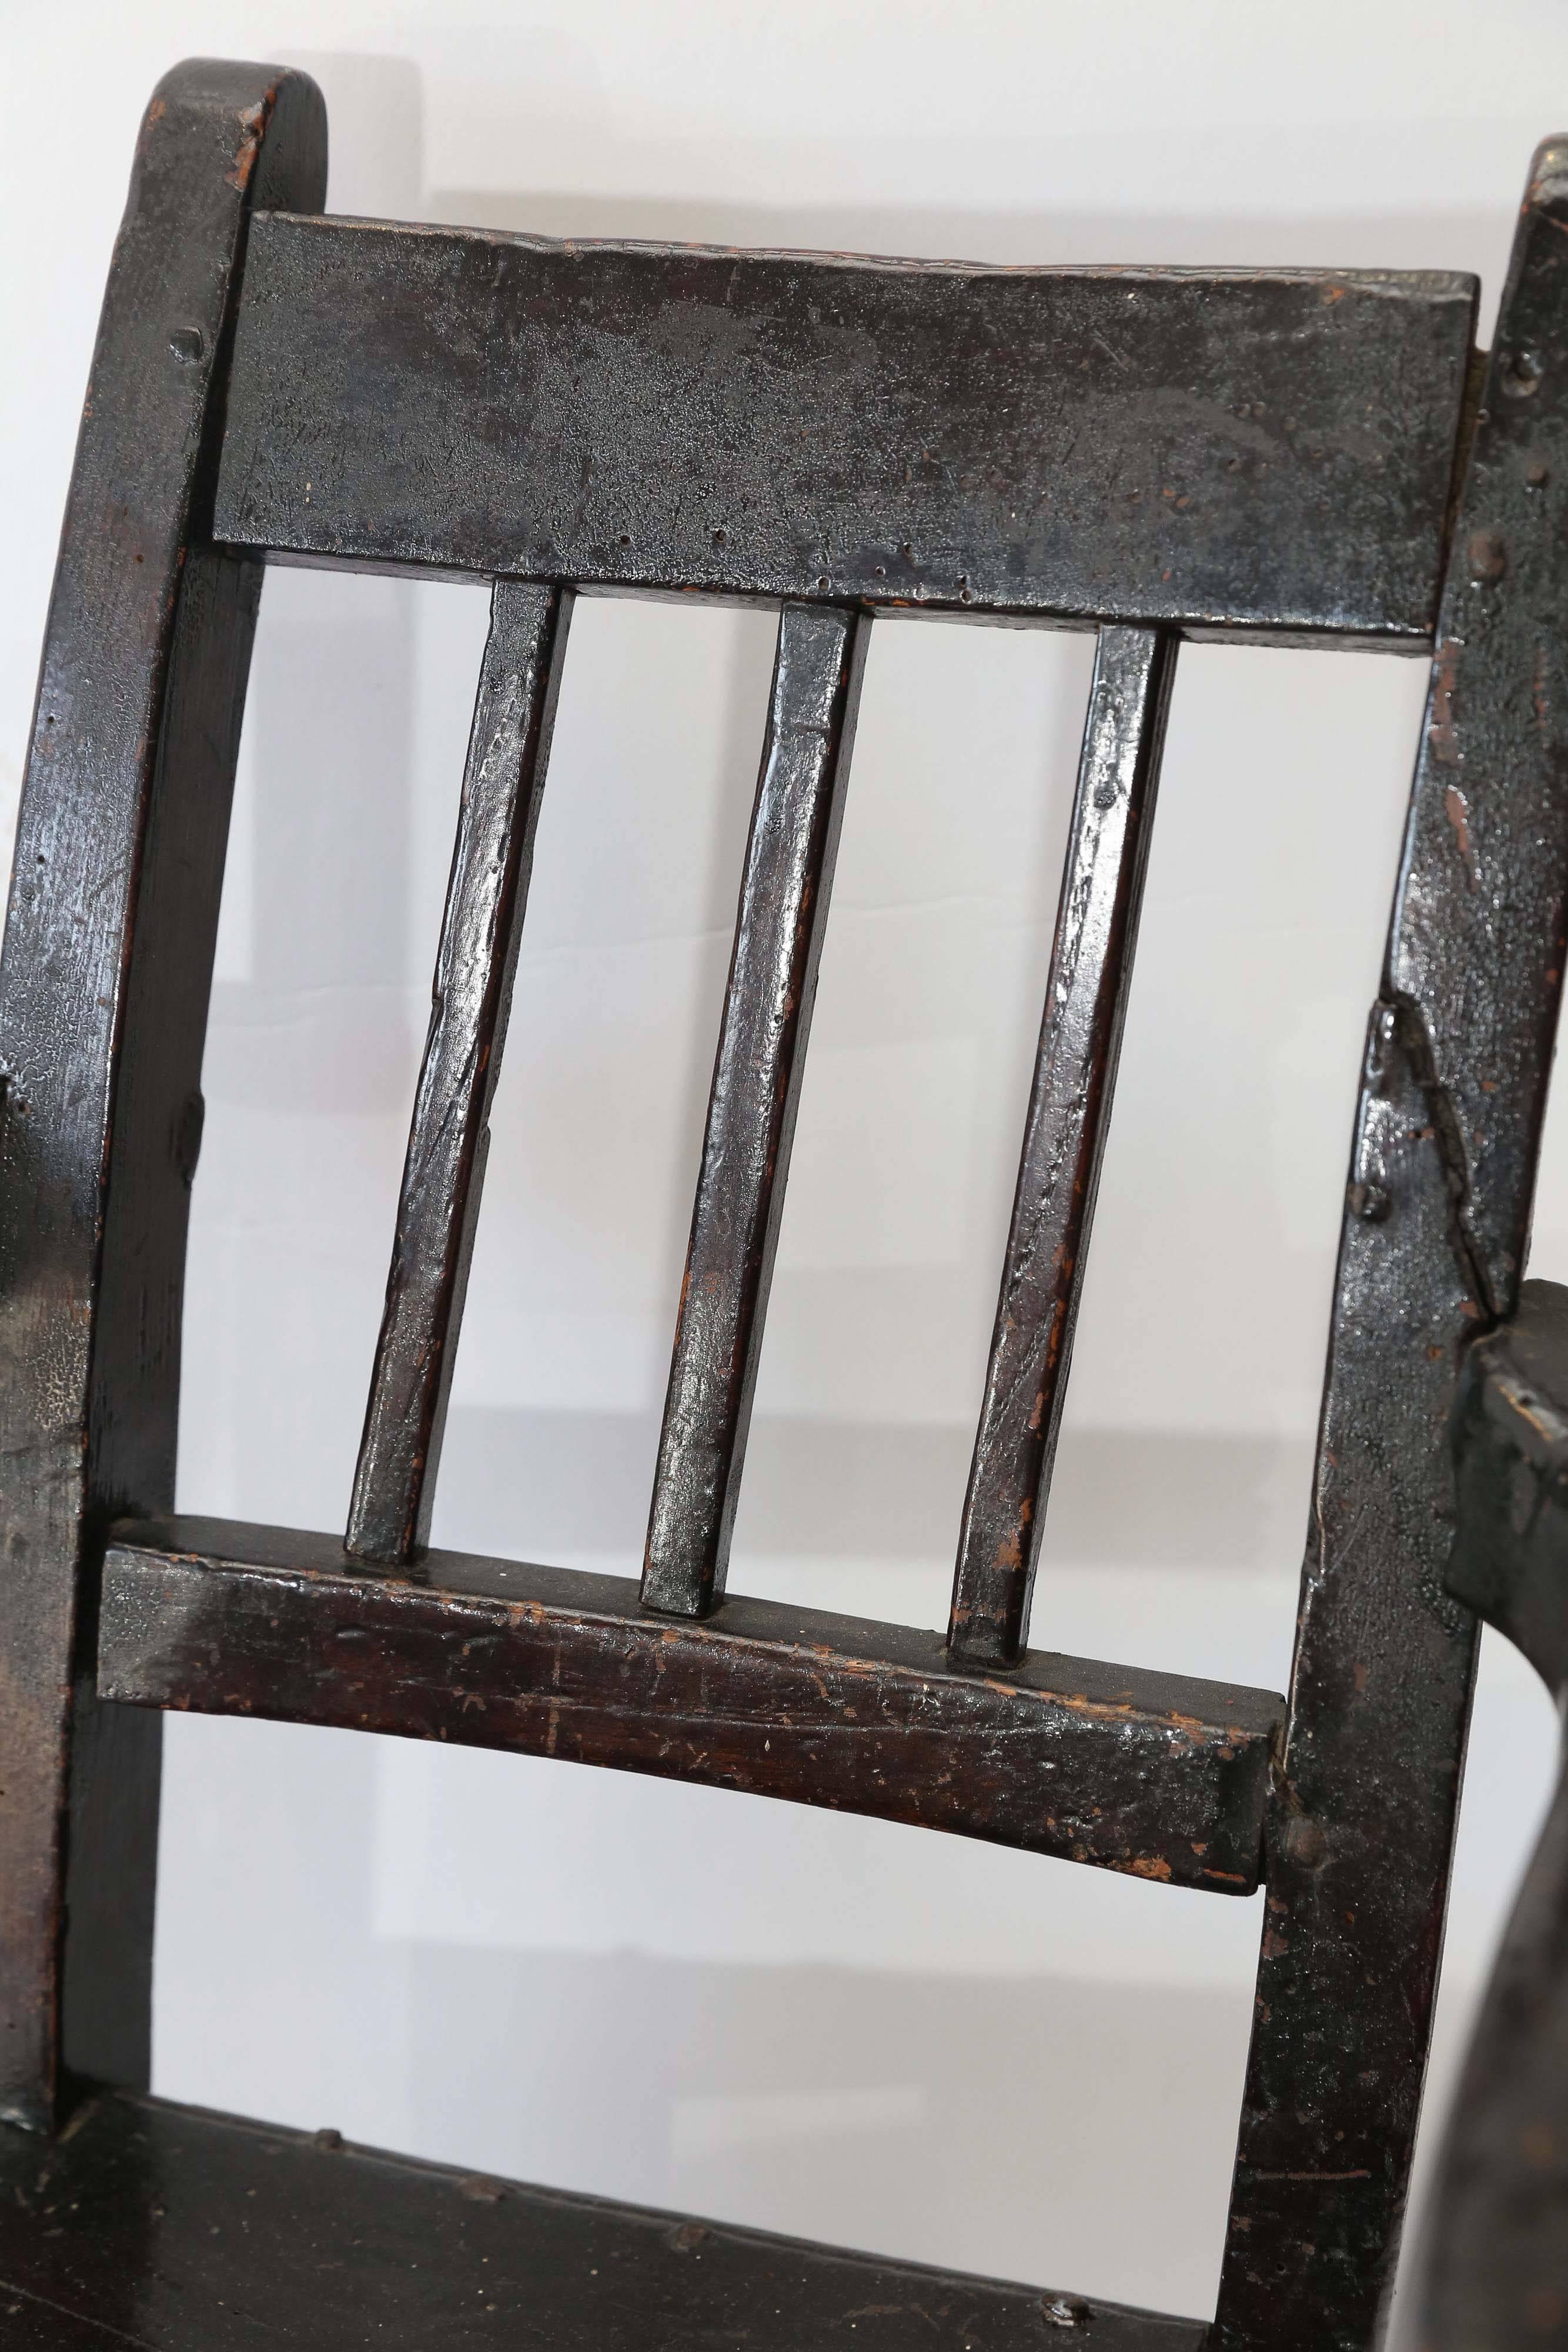 19th century painted child's chair with repairs made in metal. Detail turning of the arms. Charming example of English country Folk Art.